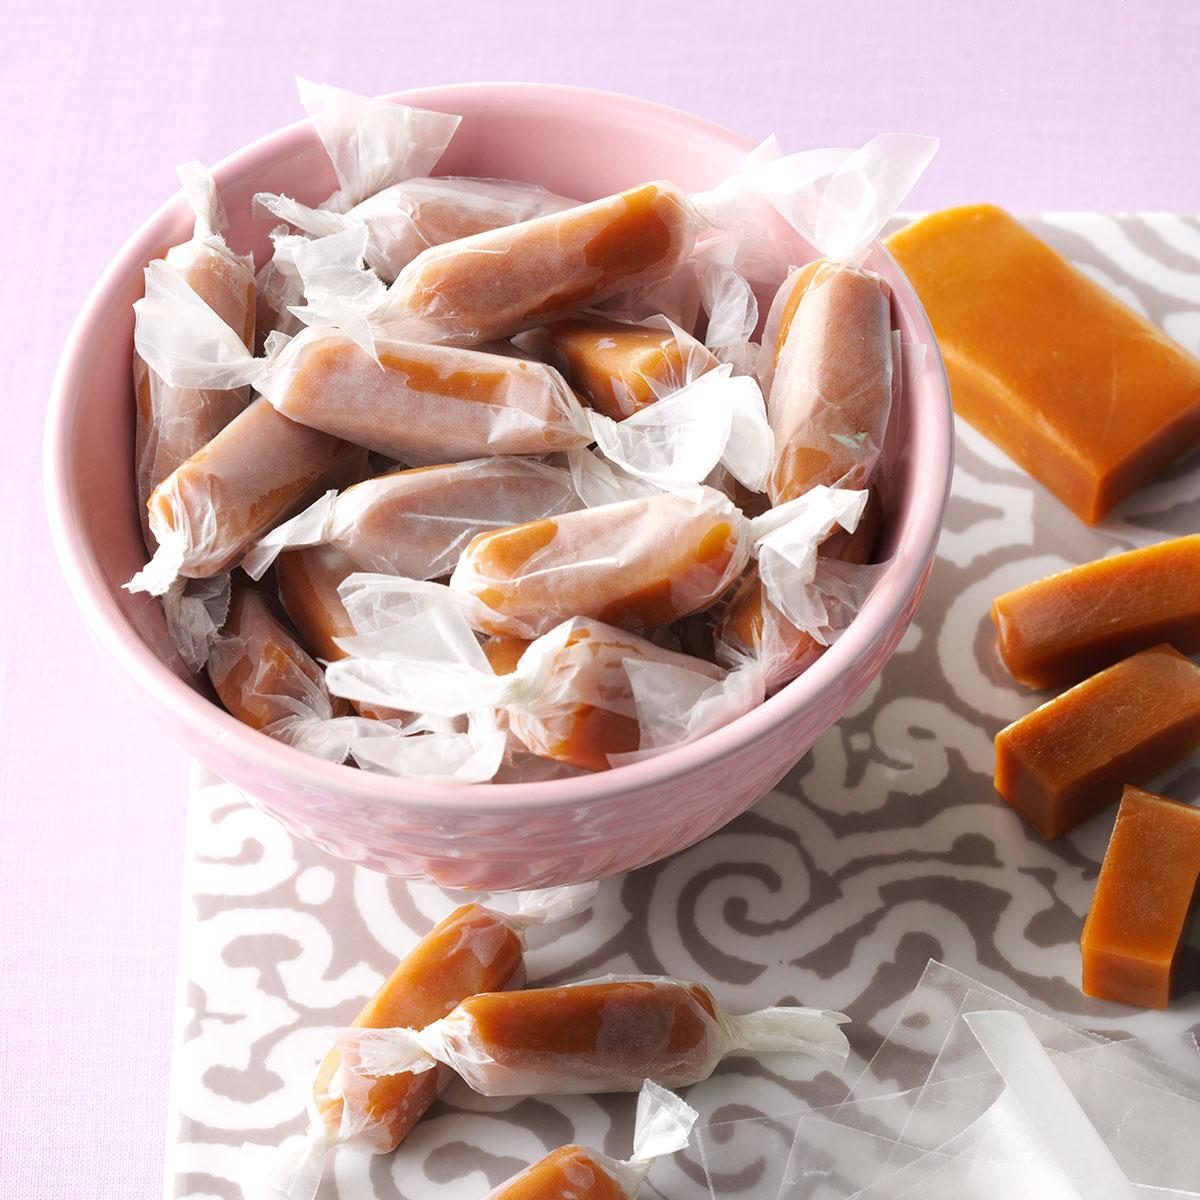 Homemade Caramels ~ An Easy and Favorite Holiday Candy Recipe